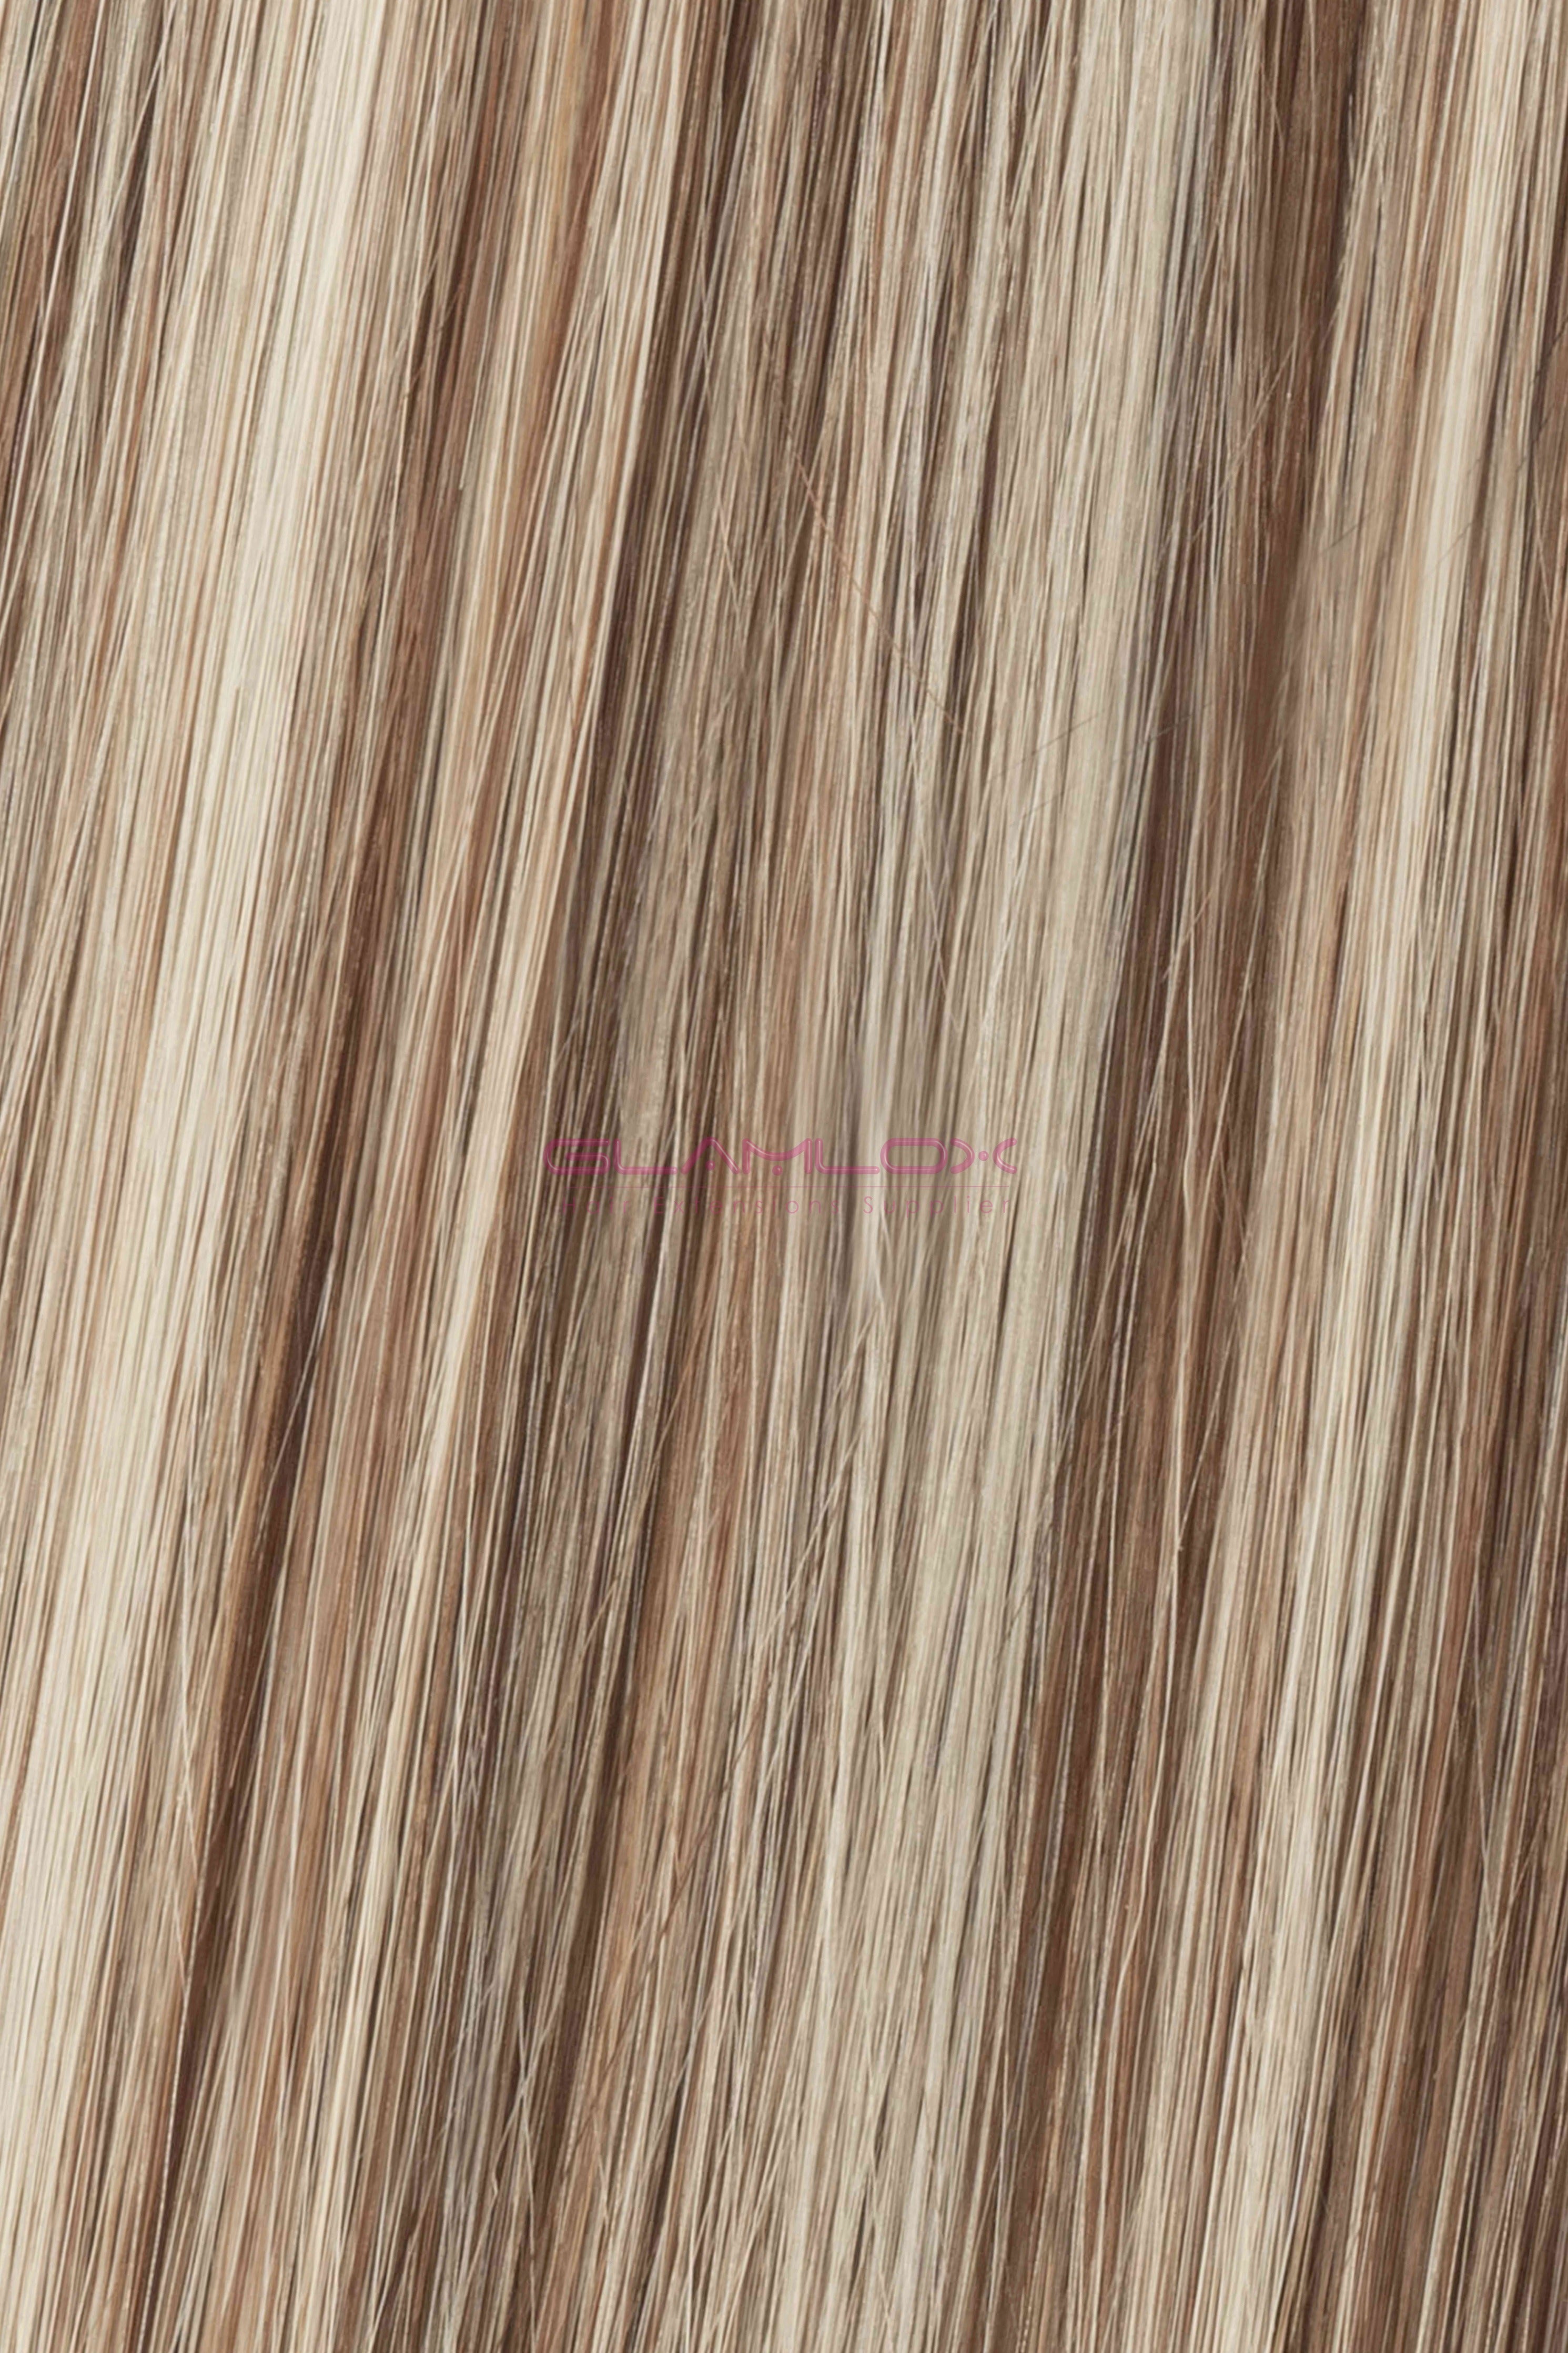 18" Nano Ring Hair Extensions - Russian Mongolian Double Drawn Remy Human Hair  - 20 Strands